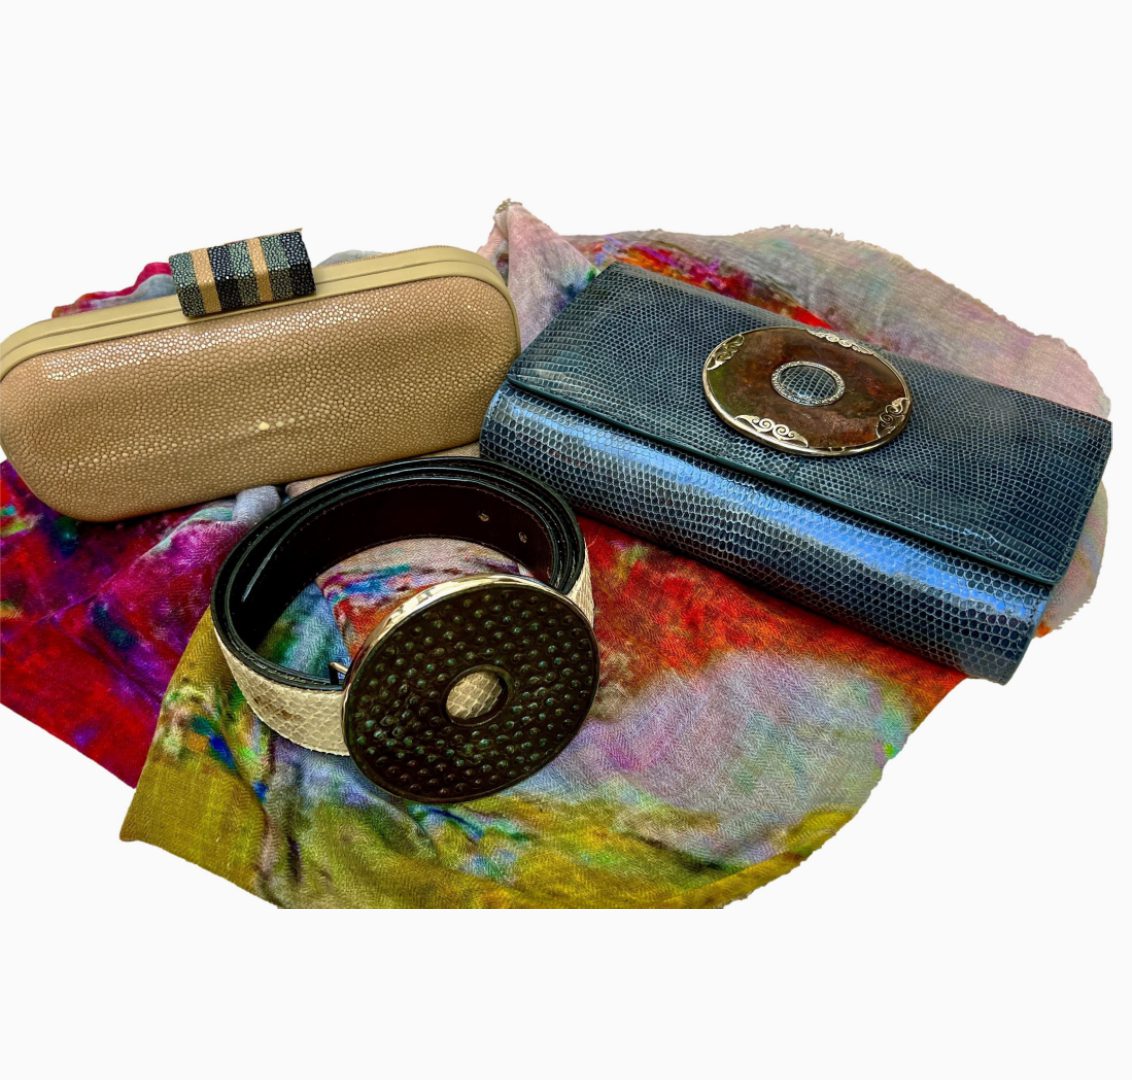 A group of three clutches sitting on top of a table.